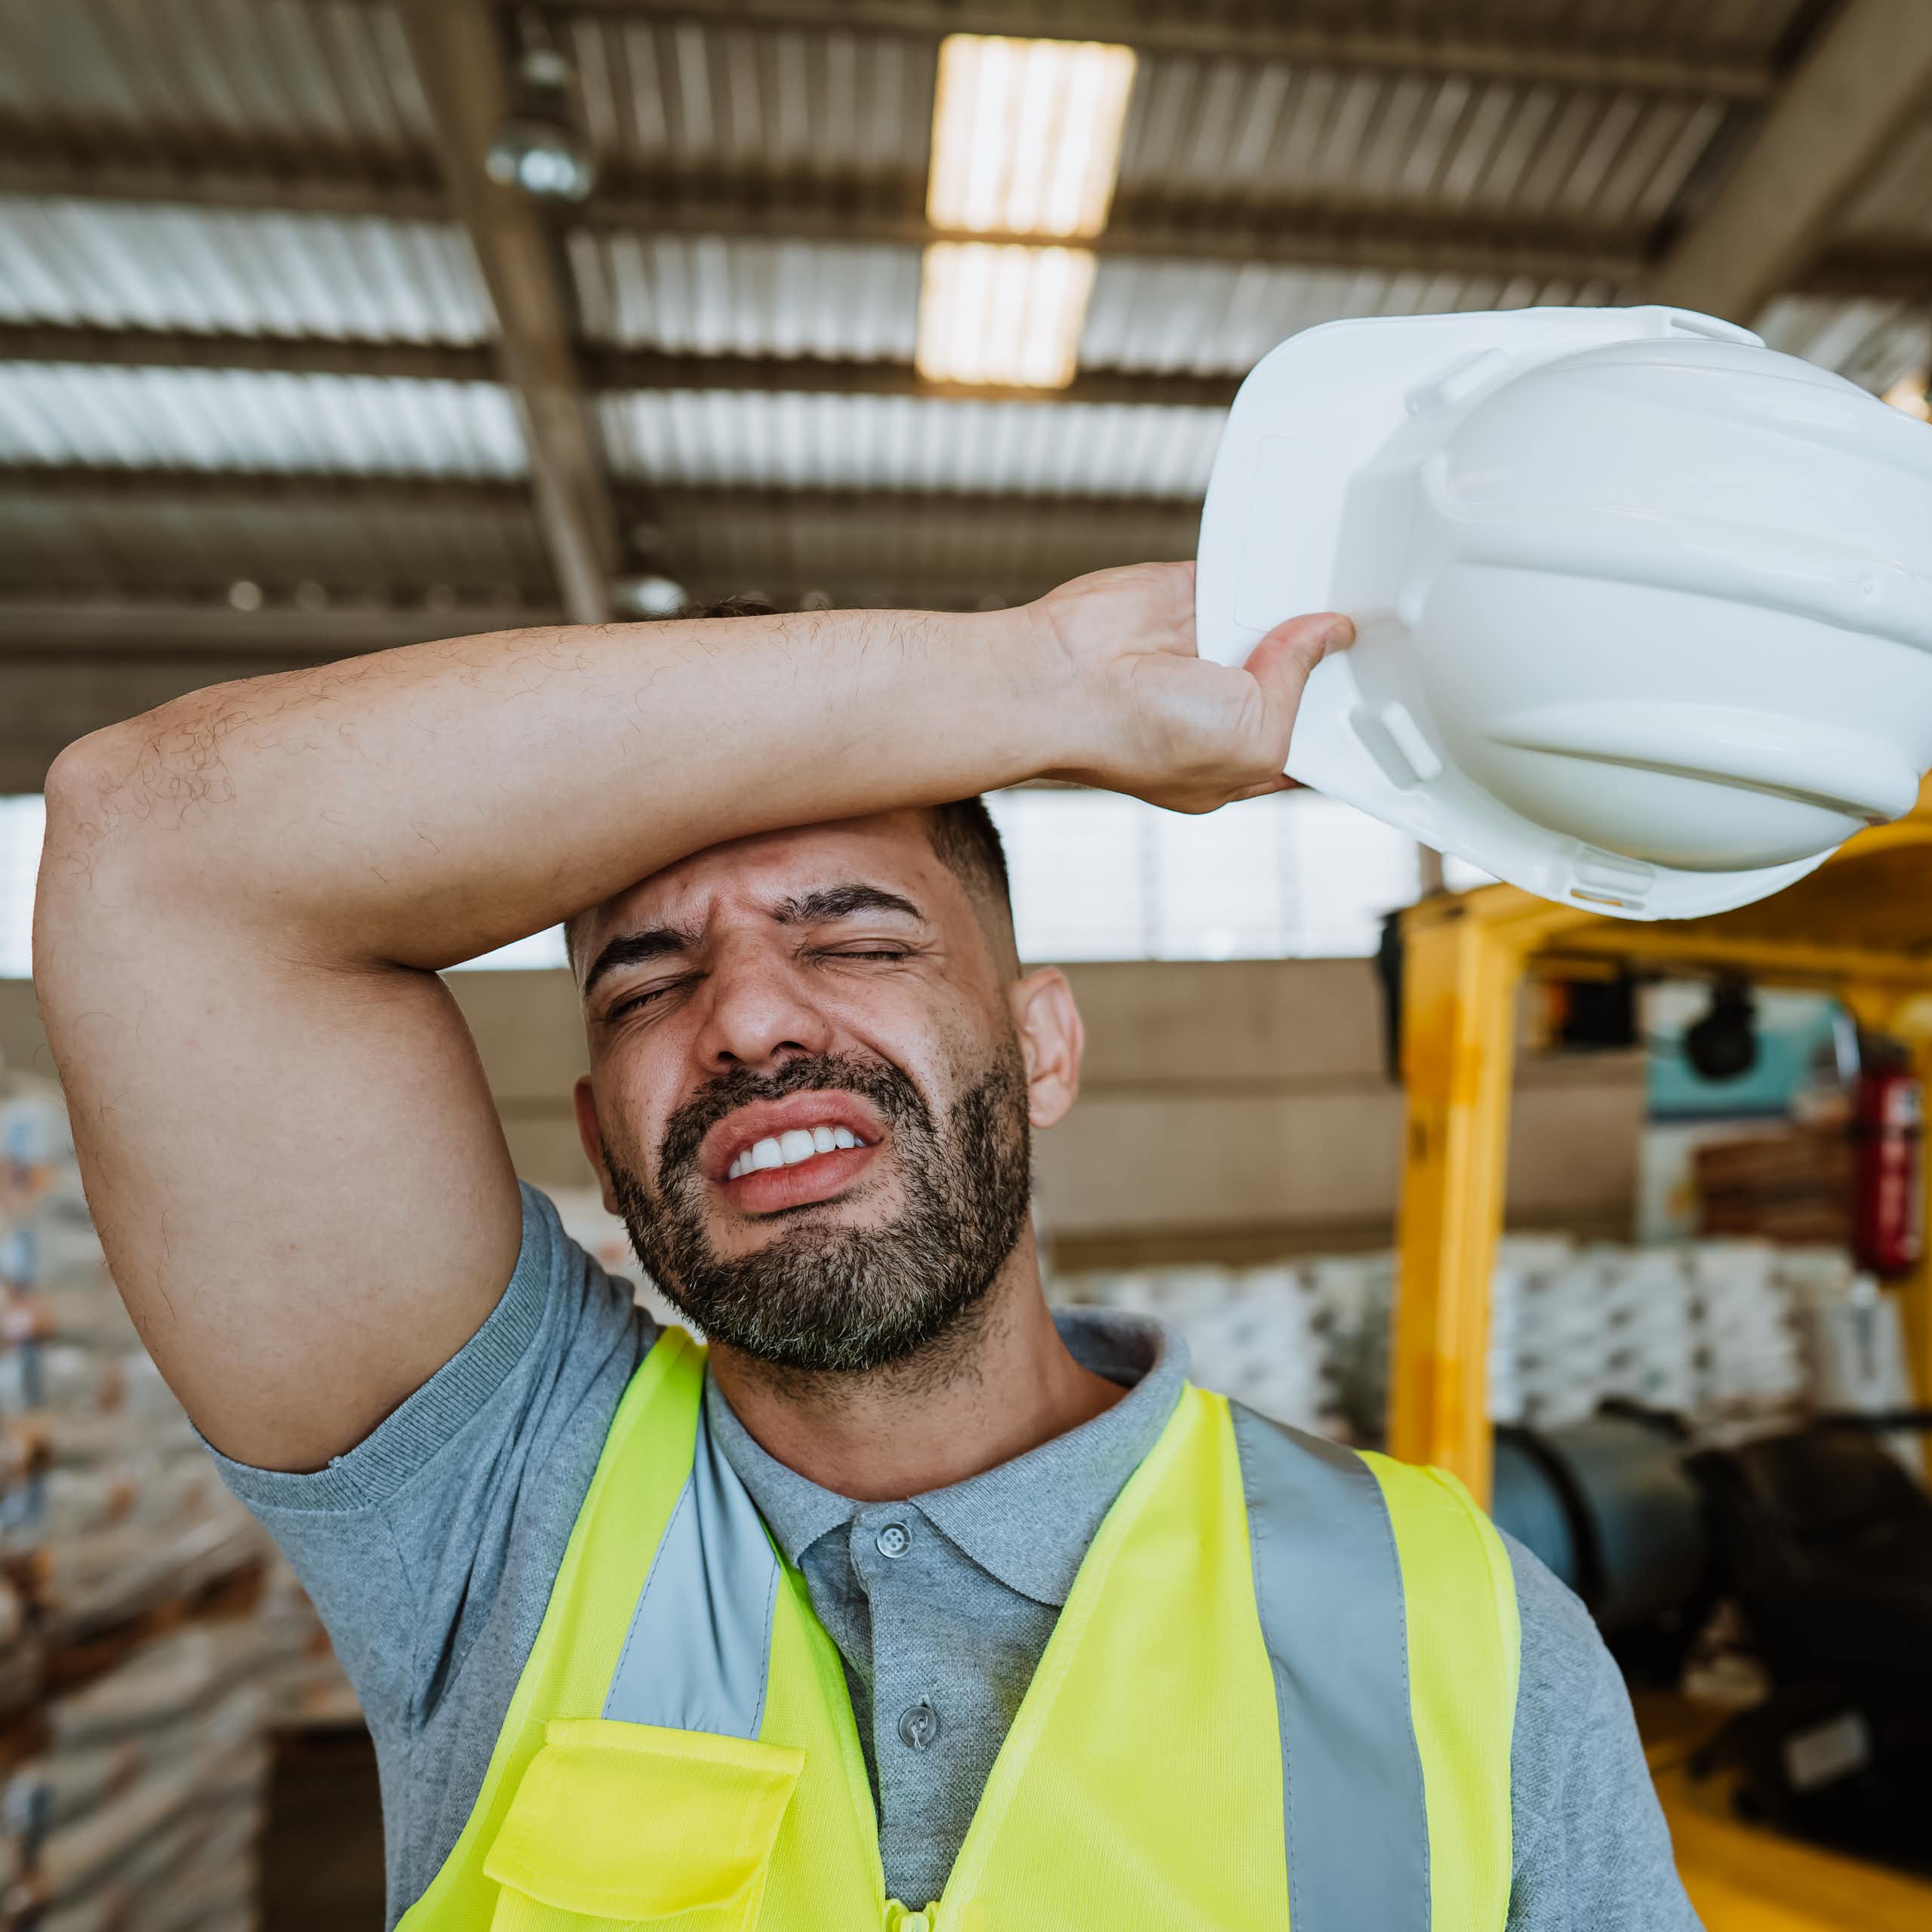 A warehouse worker wears a yellow safety vest and an expression of exhaustion.